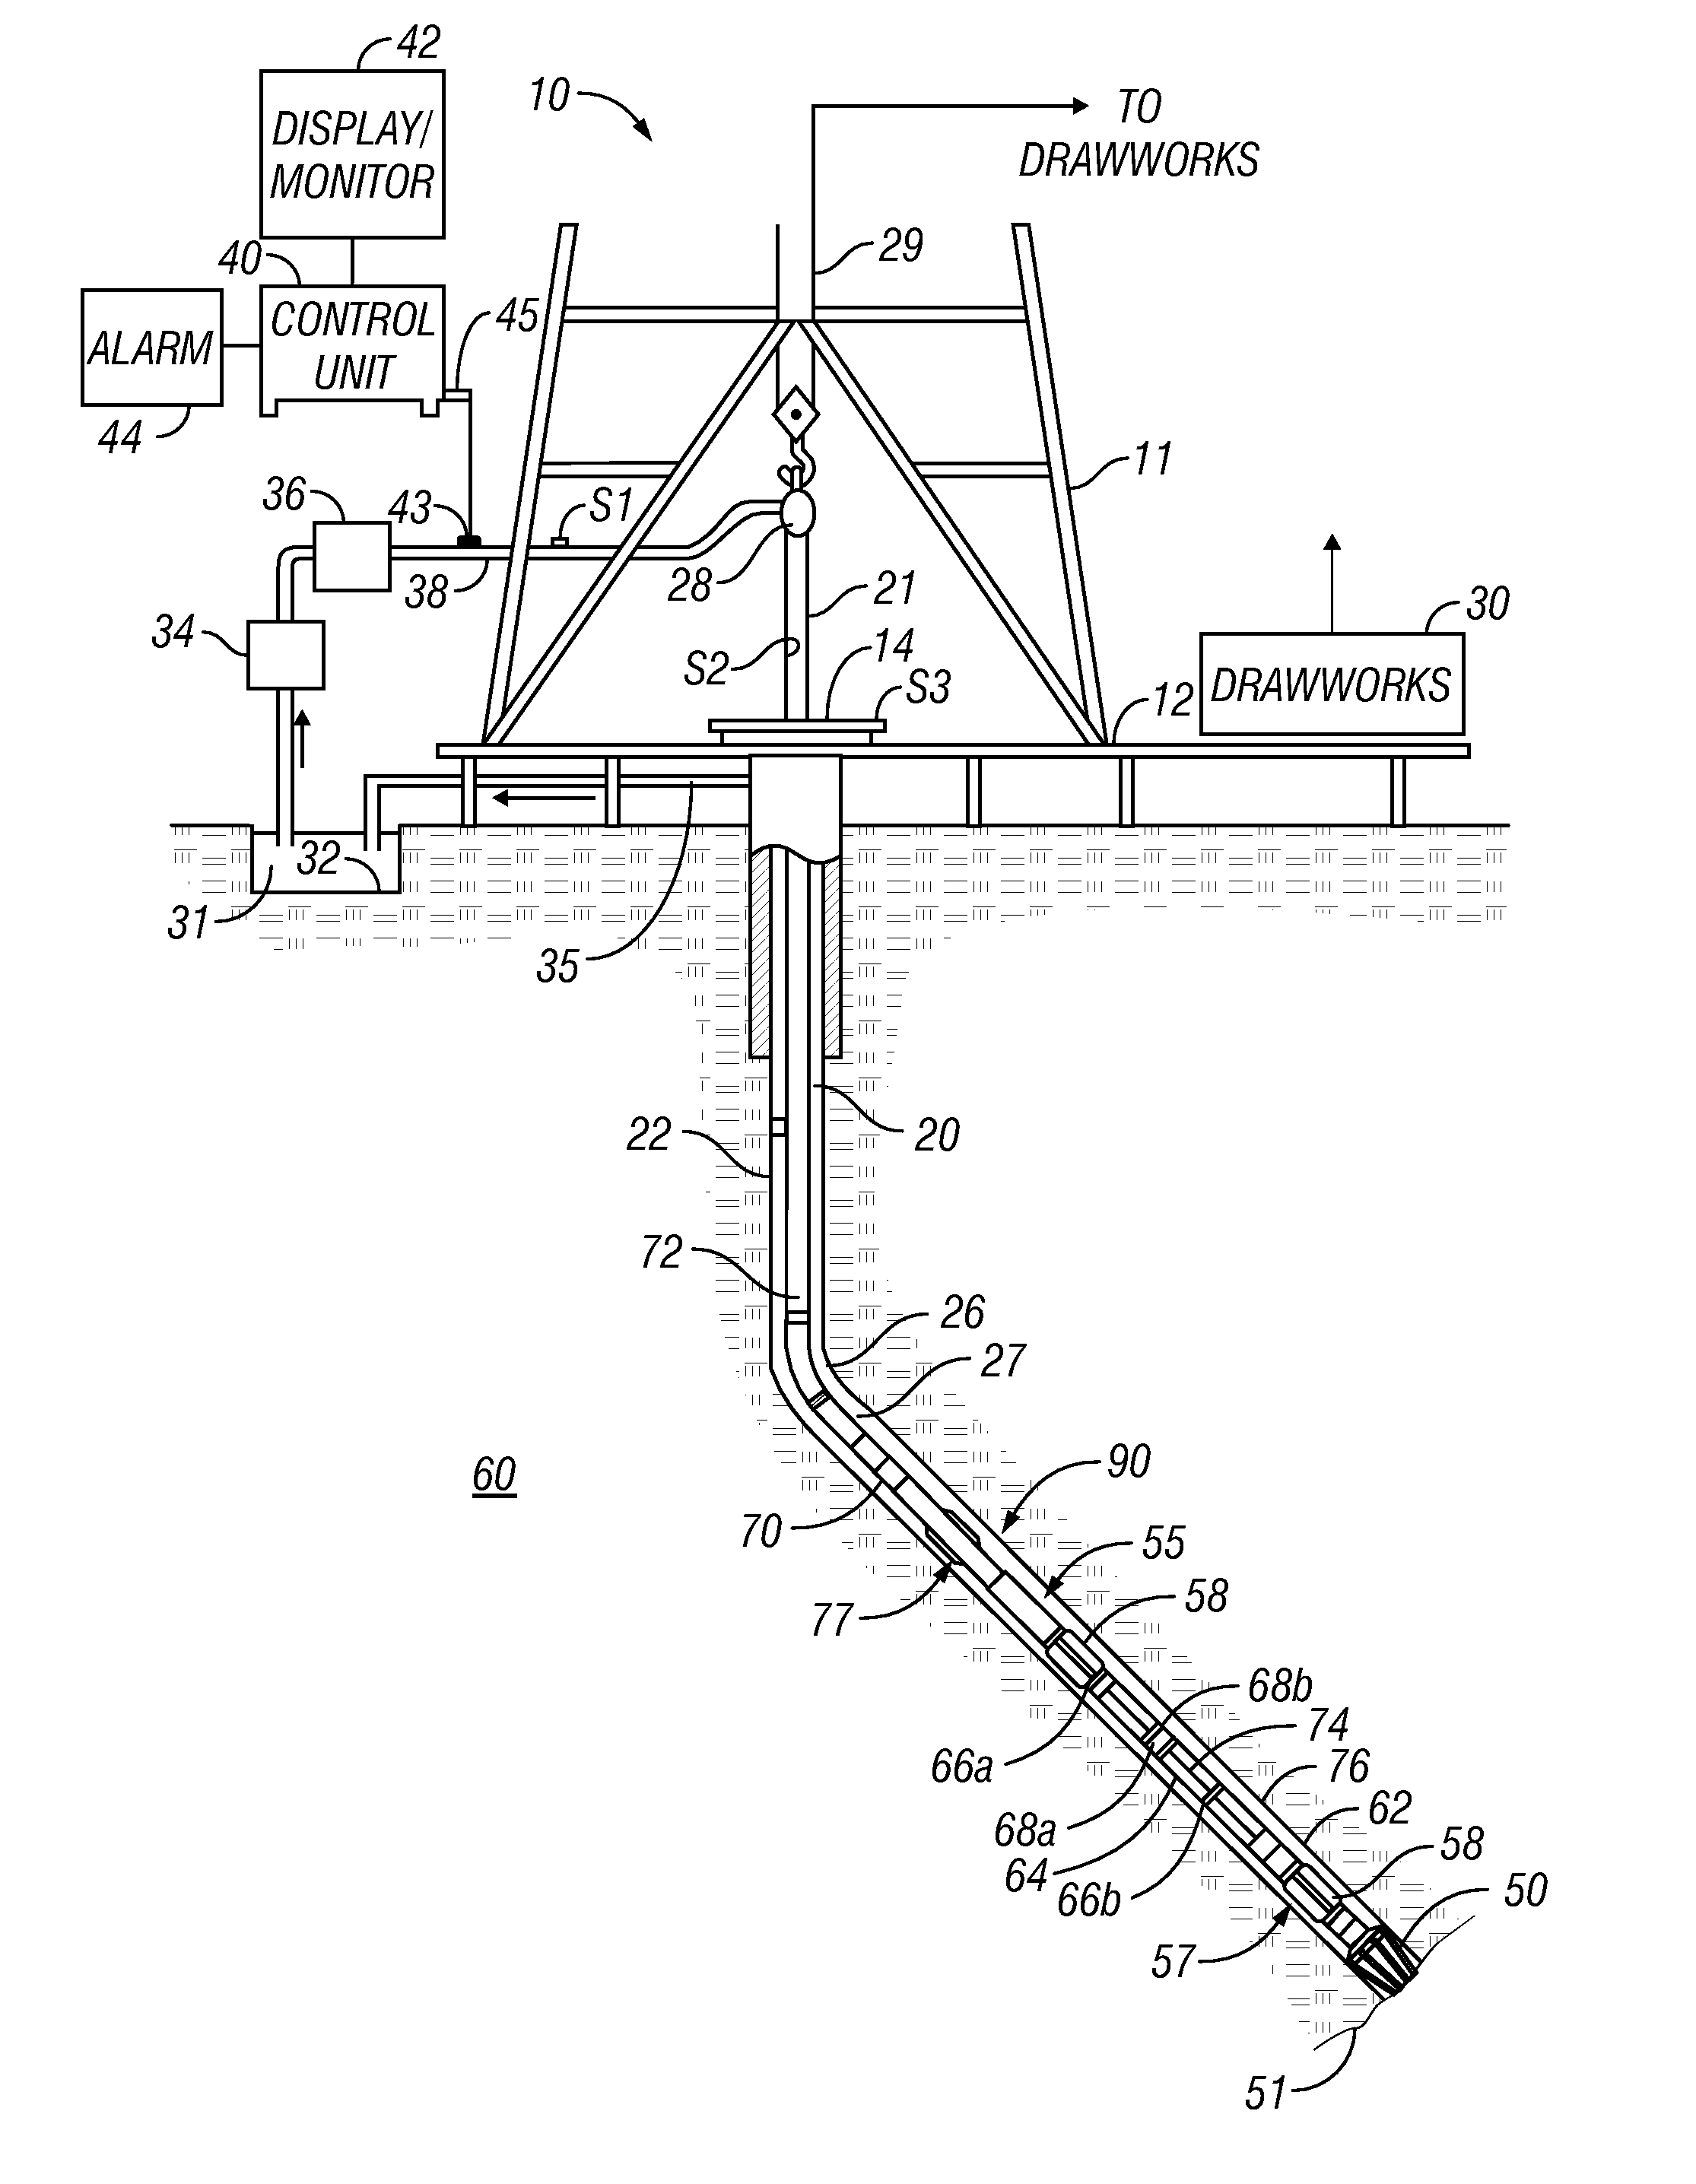 Resistivity tools with collocated antennas